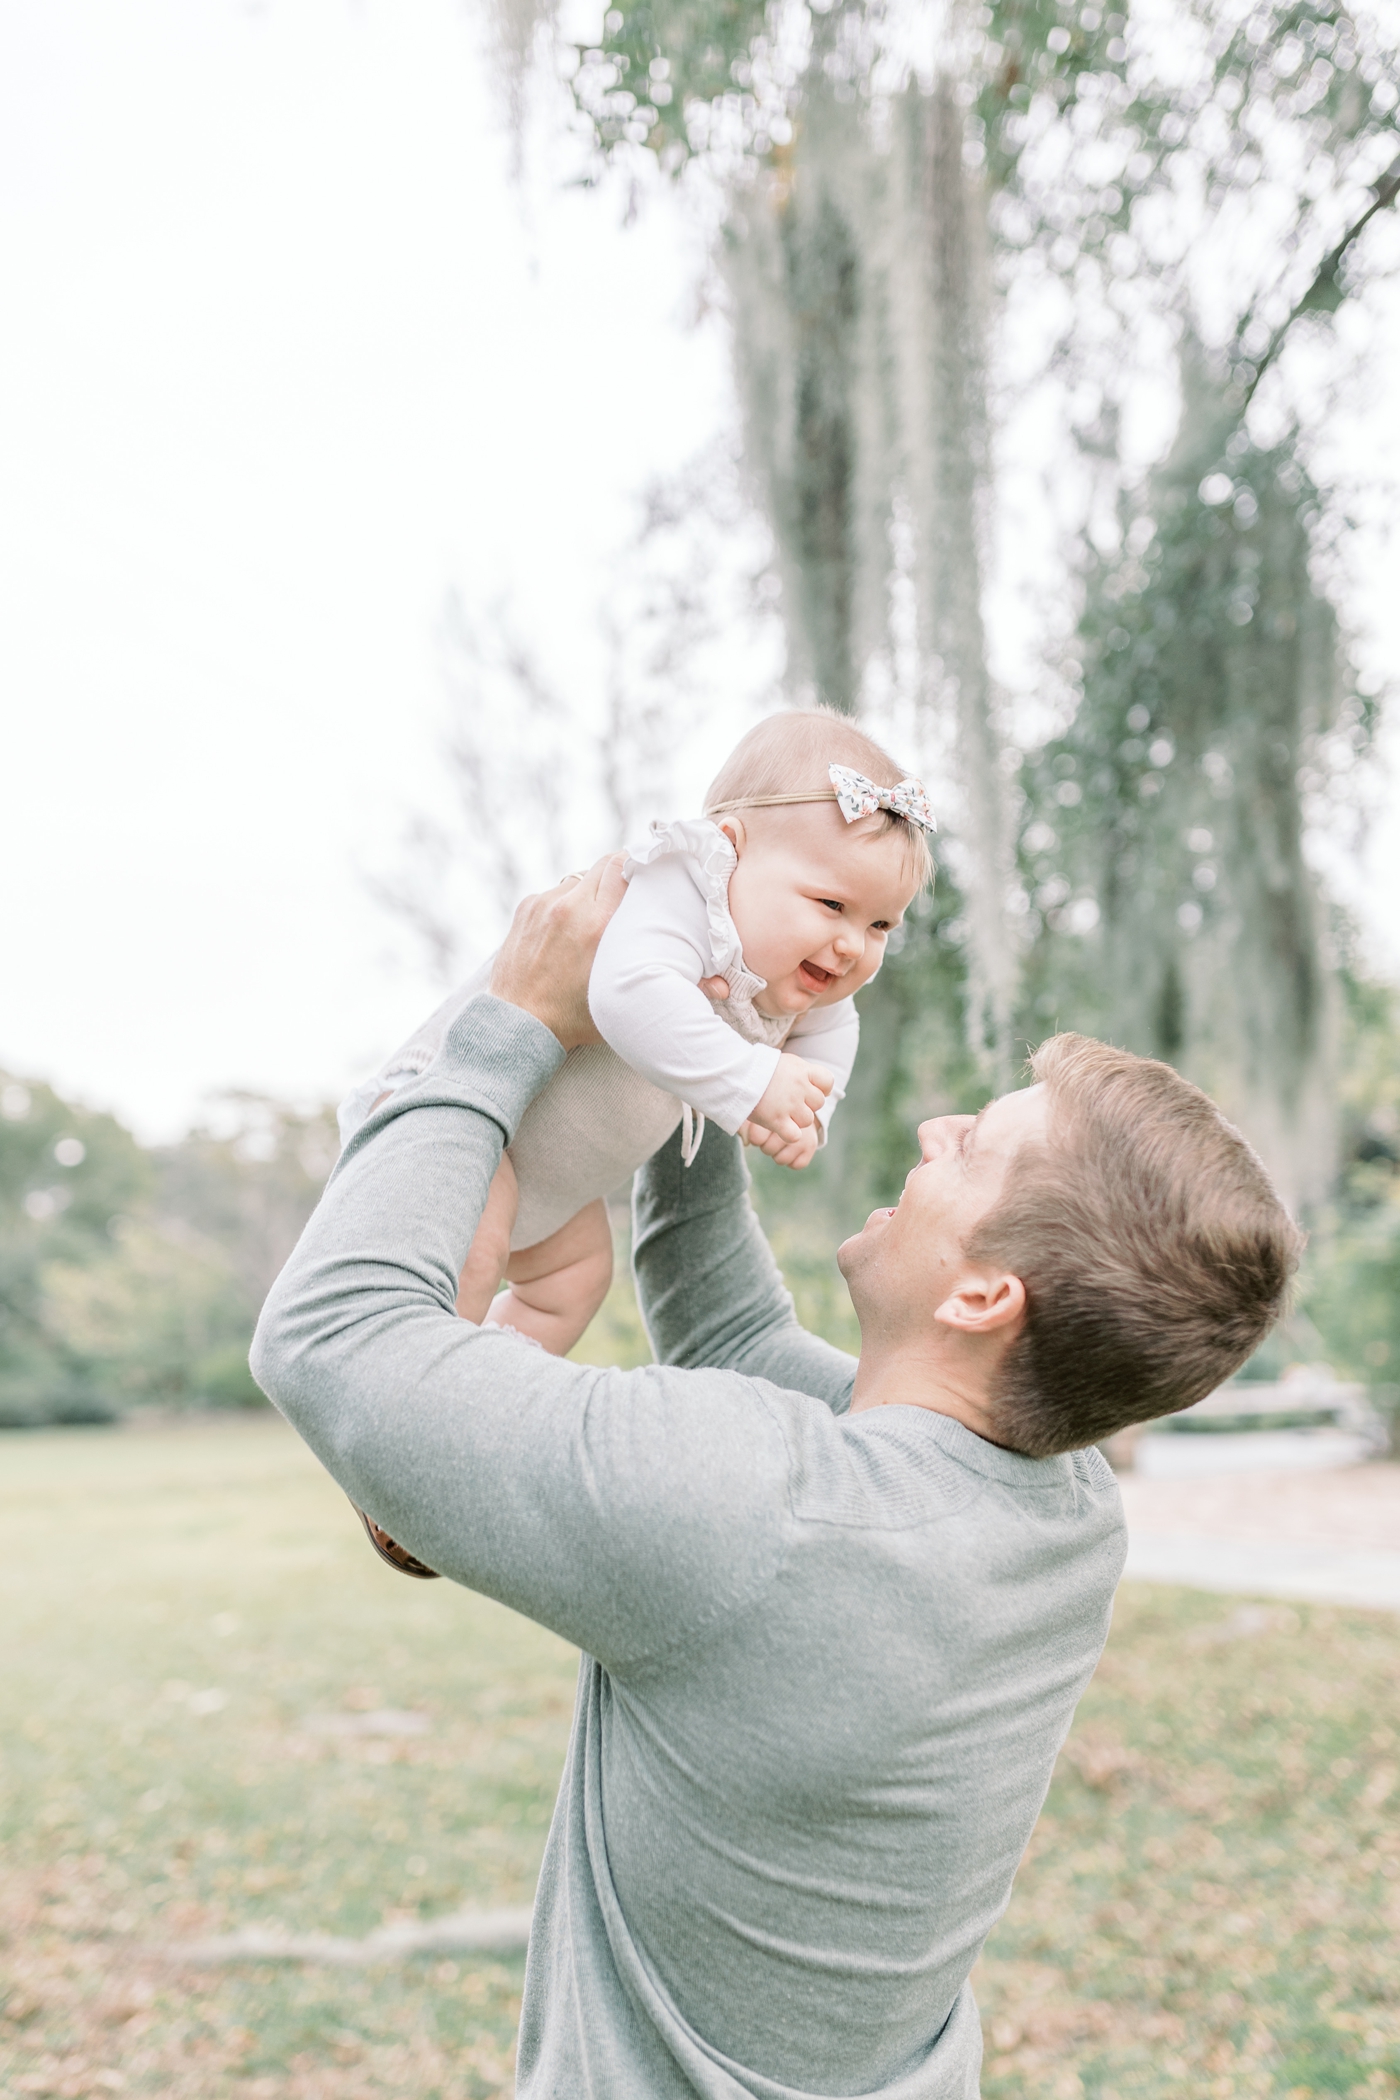 Dad playing airplane with baby during family photoshoot at Hampton Park. Photo by Caitlyn Motycka Photography.